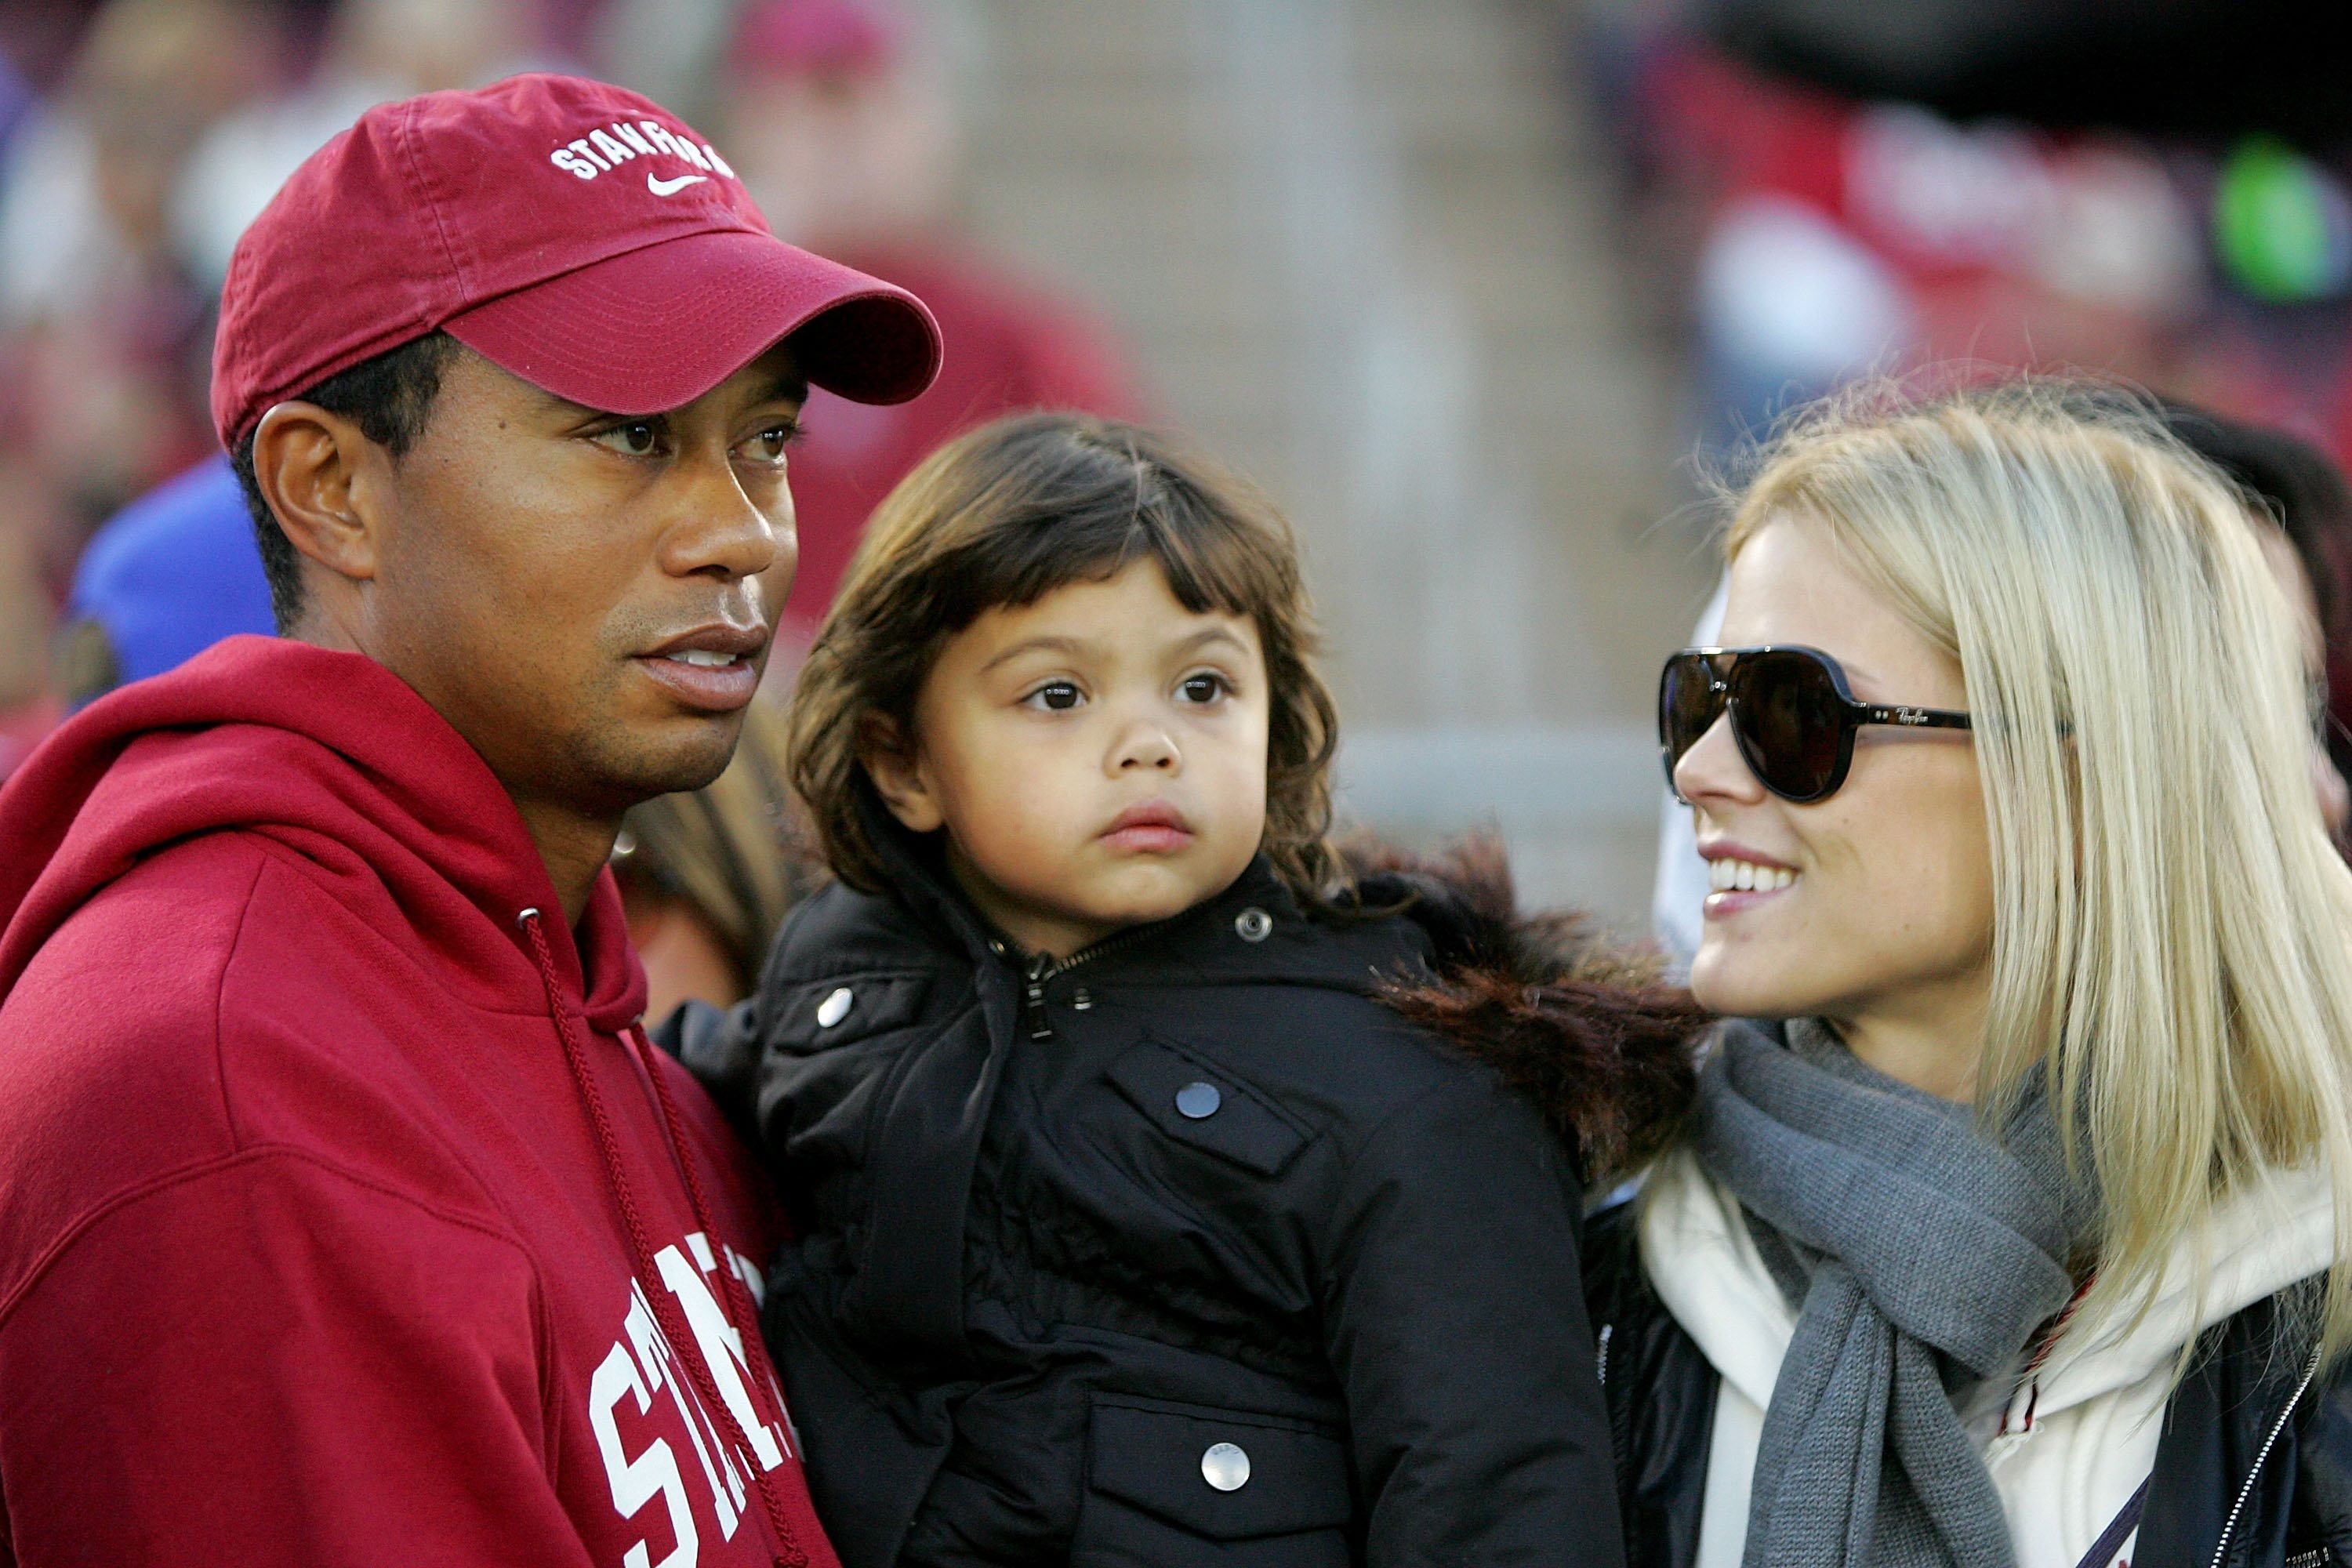 Tiger Woods, his daughter Sam, and his ex-wife, Elin Nordegren on November 21, 2009 in Palo Alto, California | Source: Getty Images